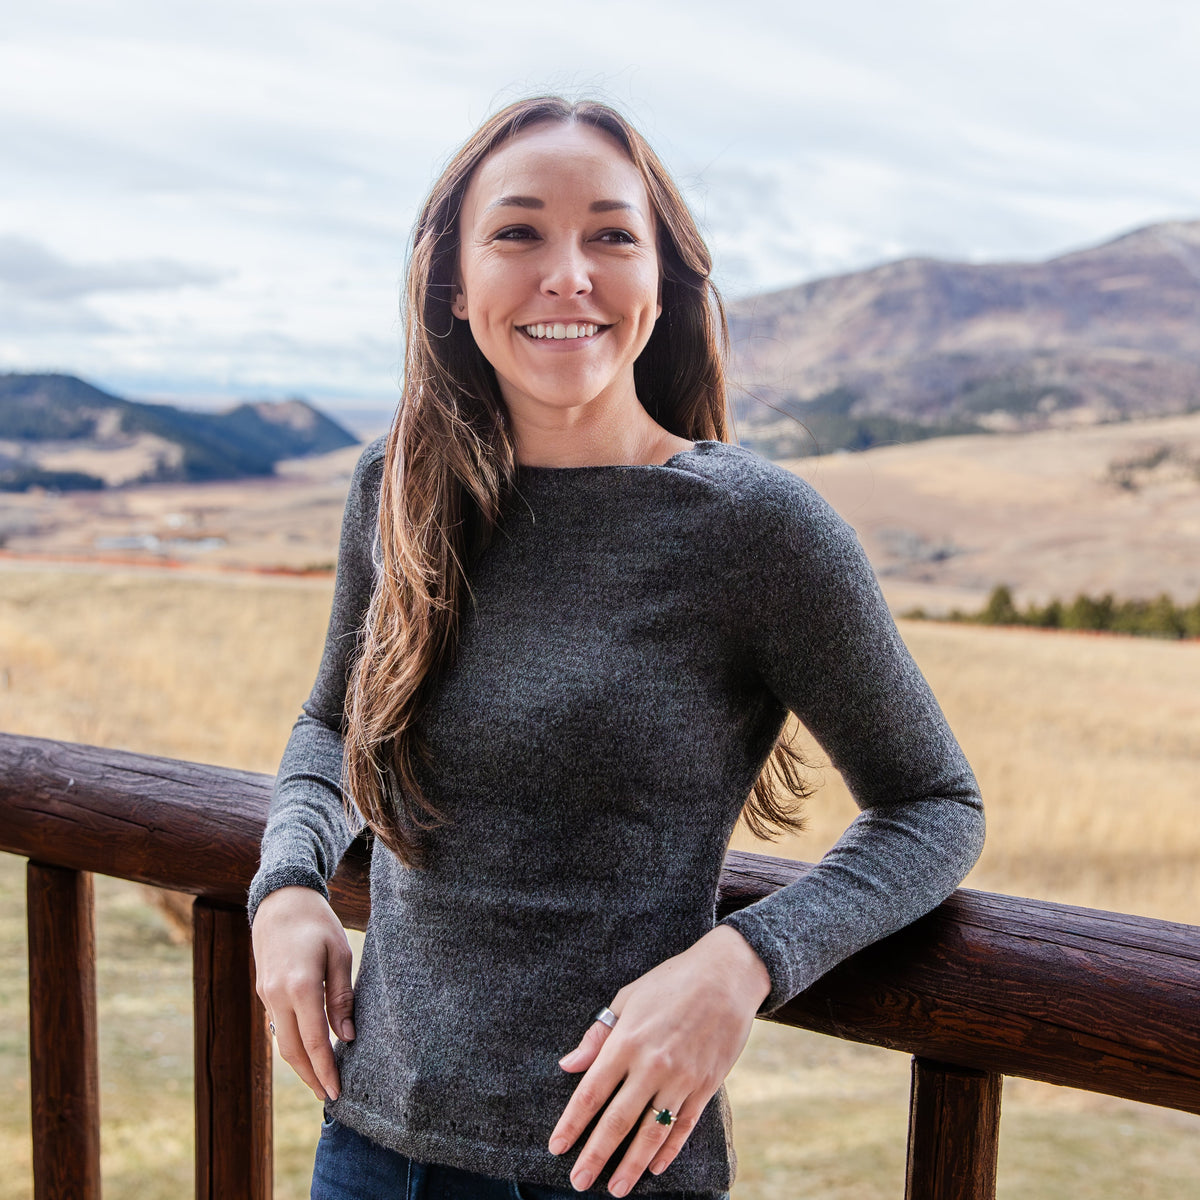 A woman with brown hair leaning against a wooden railing with mountains in the background. She is wearing the comfortable cozy soft elegant fashionable charcoal gray Alpacas of Montana Luxe Light sweater for women.